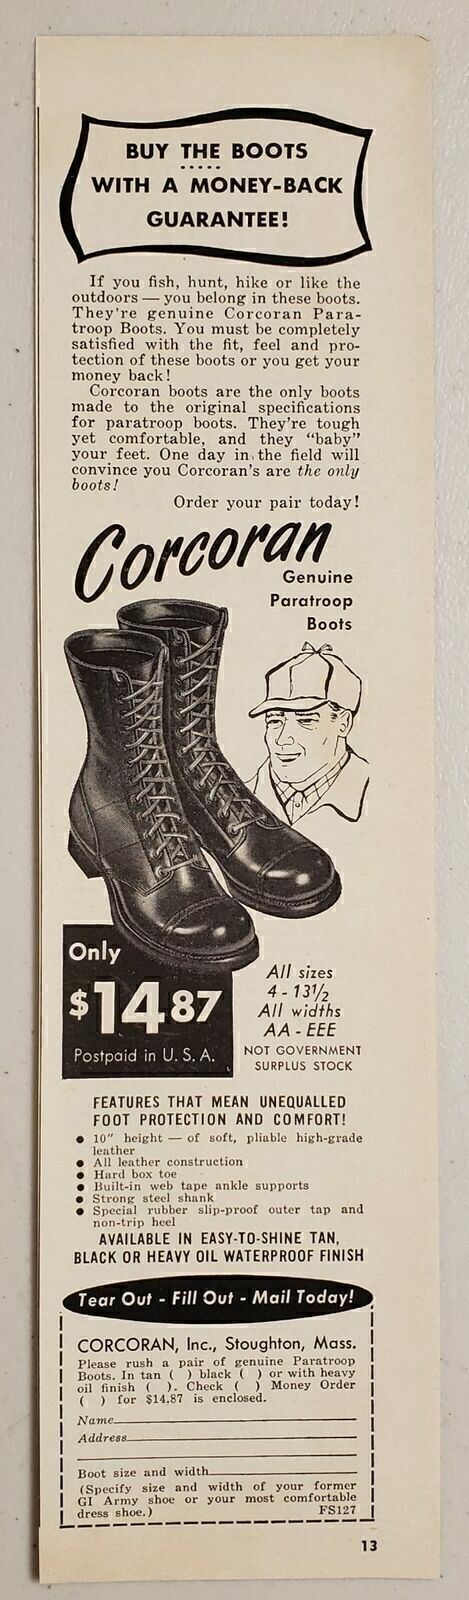 1957 Print Ad Corcoran Genuine Paratroop Boots Made in Stoughton,Massachusetts